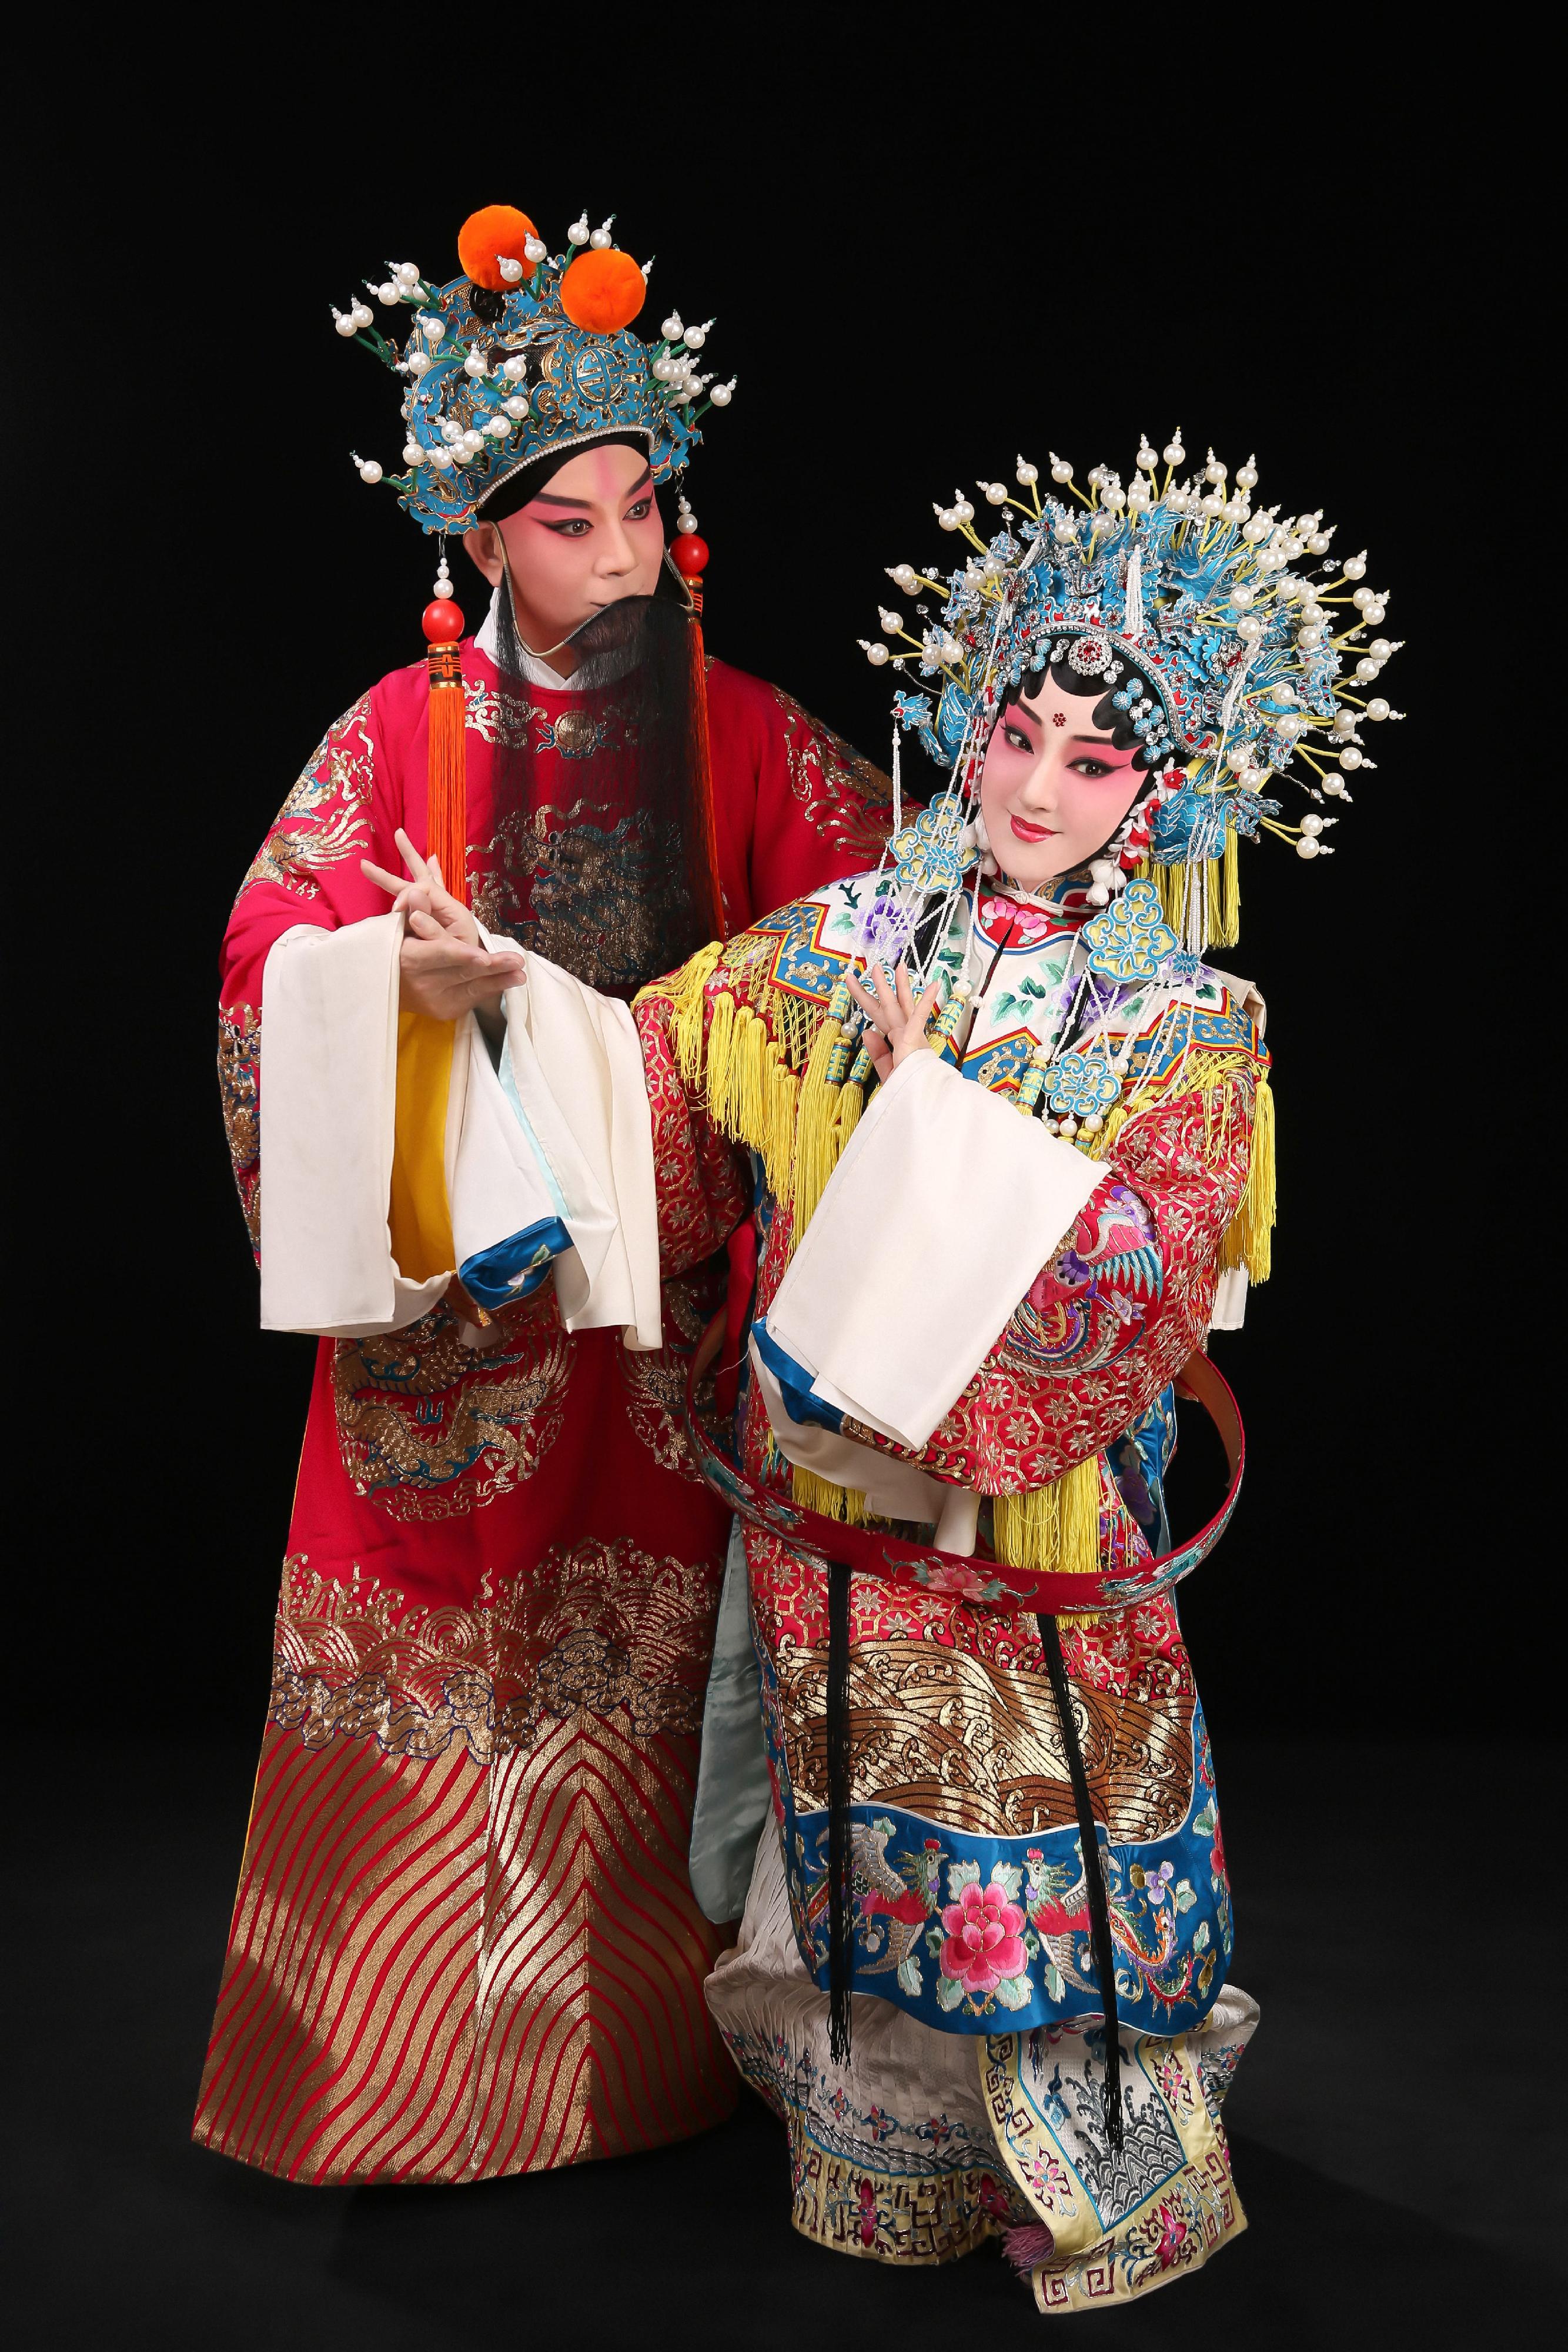 The inaugural Chinese Culture Festival will stage three classic Northern Kunqu opera plays in July. Photo shows a scene from the performance "The Palace of Eternal Life".
